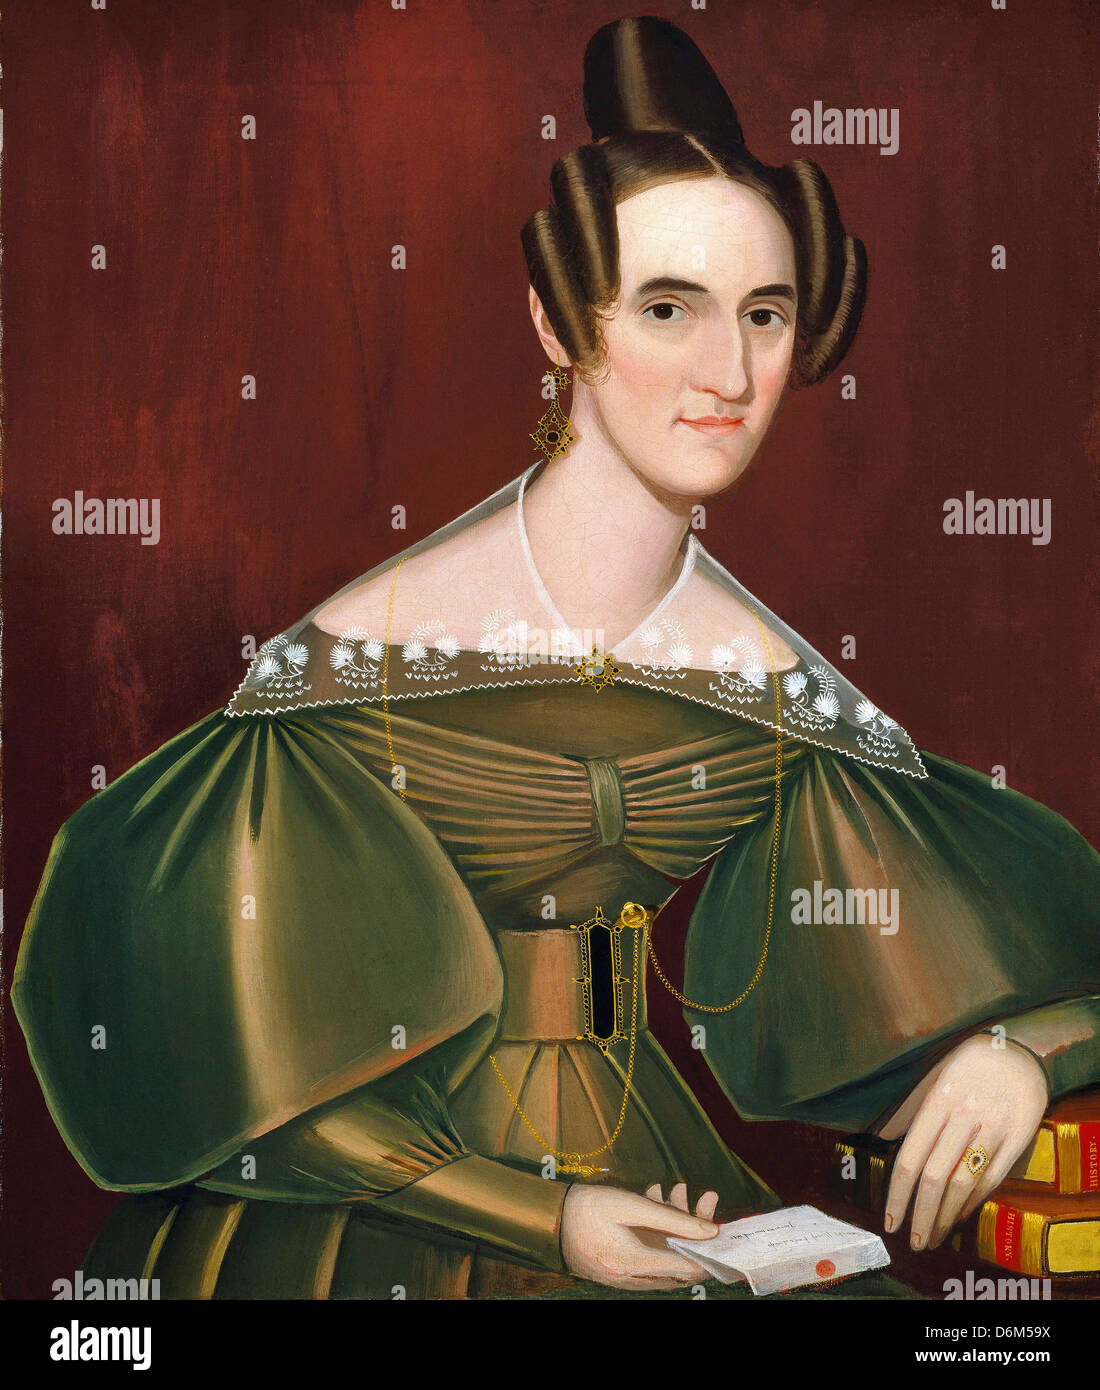 Ammi Phillips, American, Jeannette Woolley, later Mrs. John Vincent Storm. Circa 1838. Oil on canvas. Brooklyn Museum, New York Stock Photo